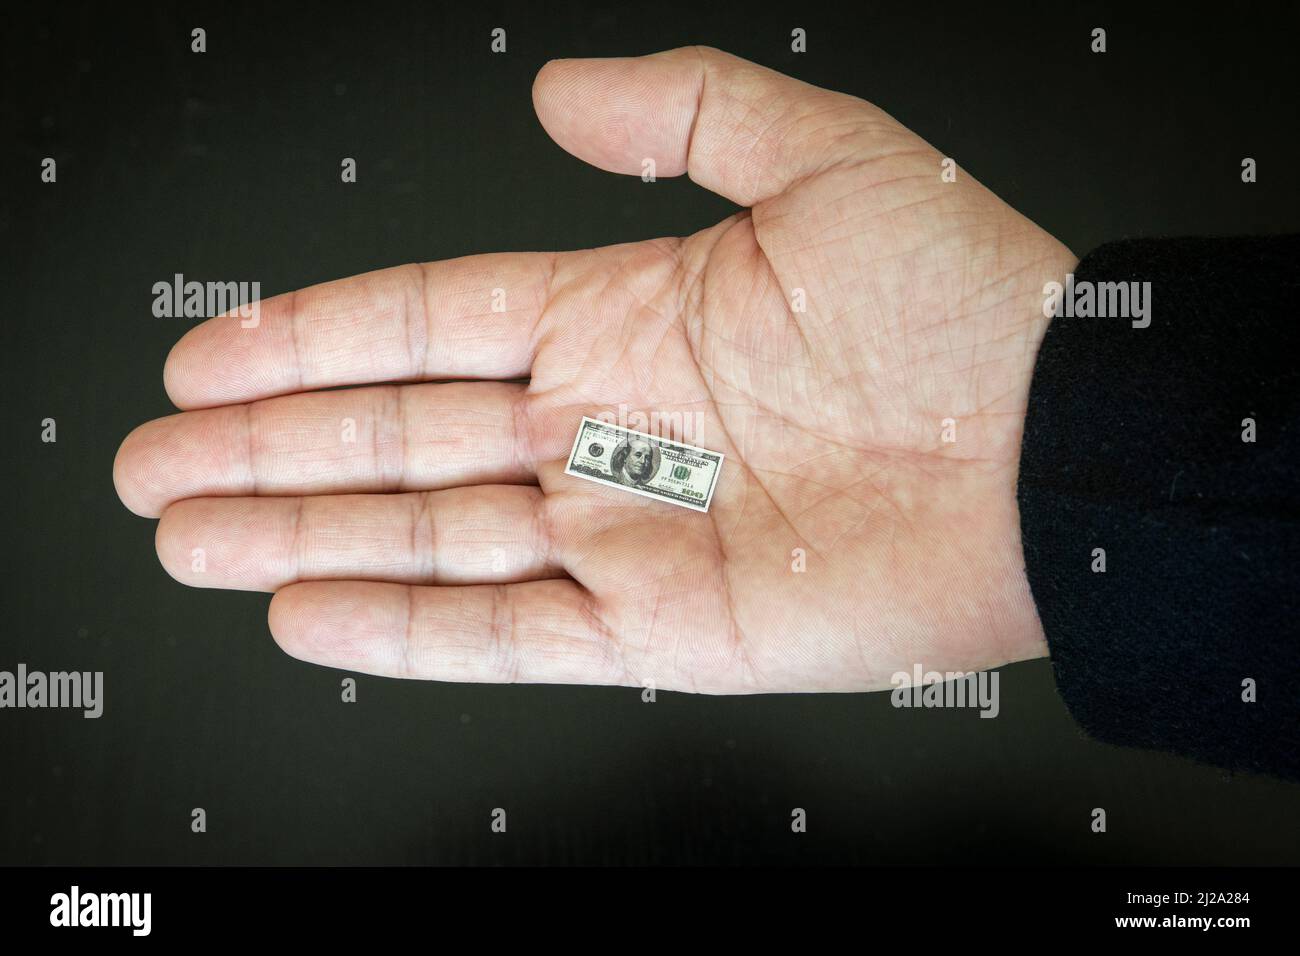 the concept of inflation and falling incomes. a small hundred-dollar bill in the businessman's hand Stock Photo